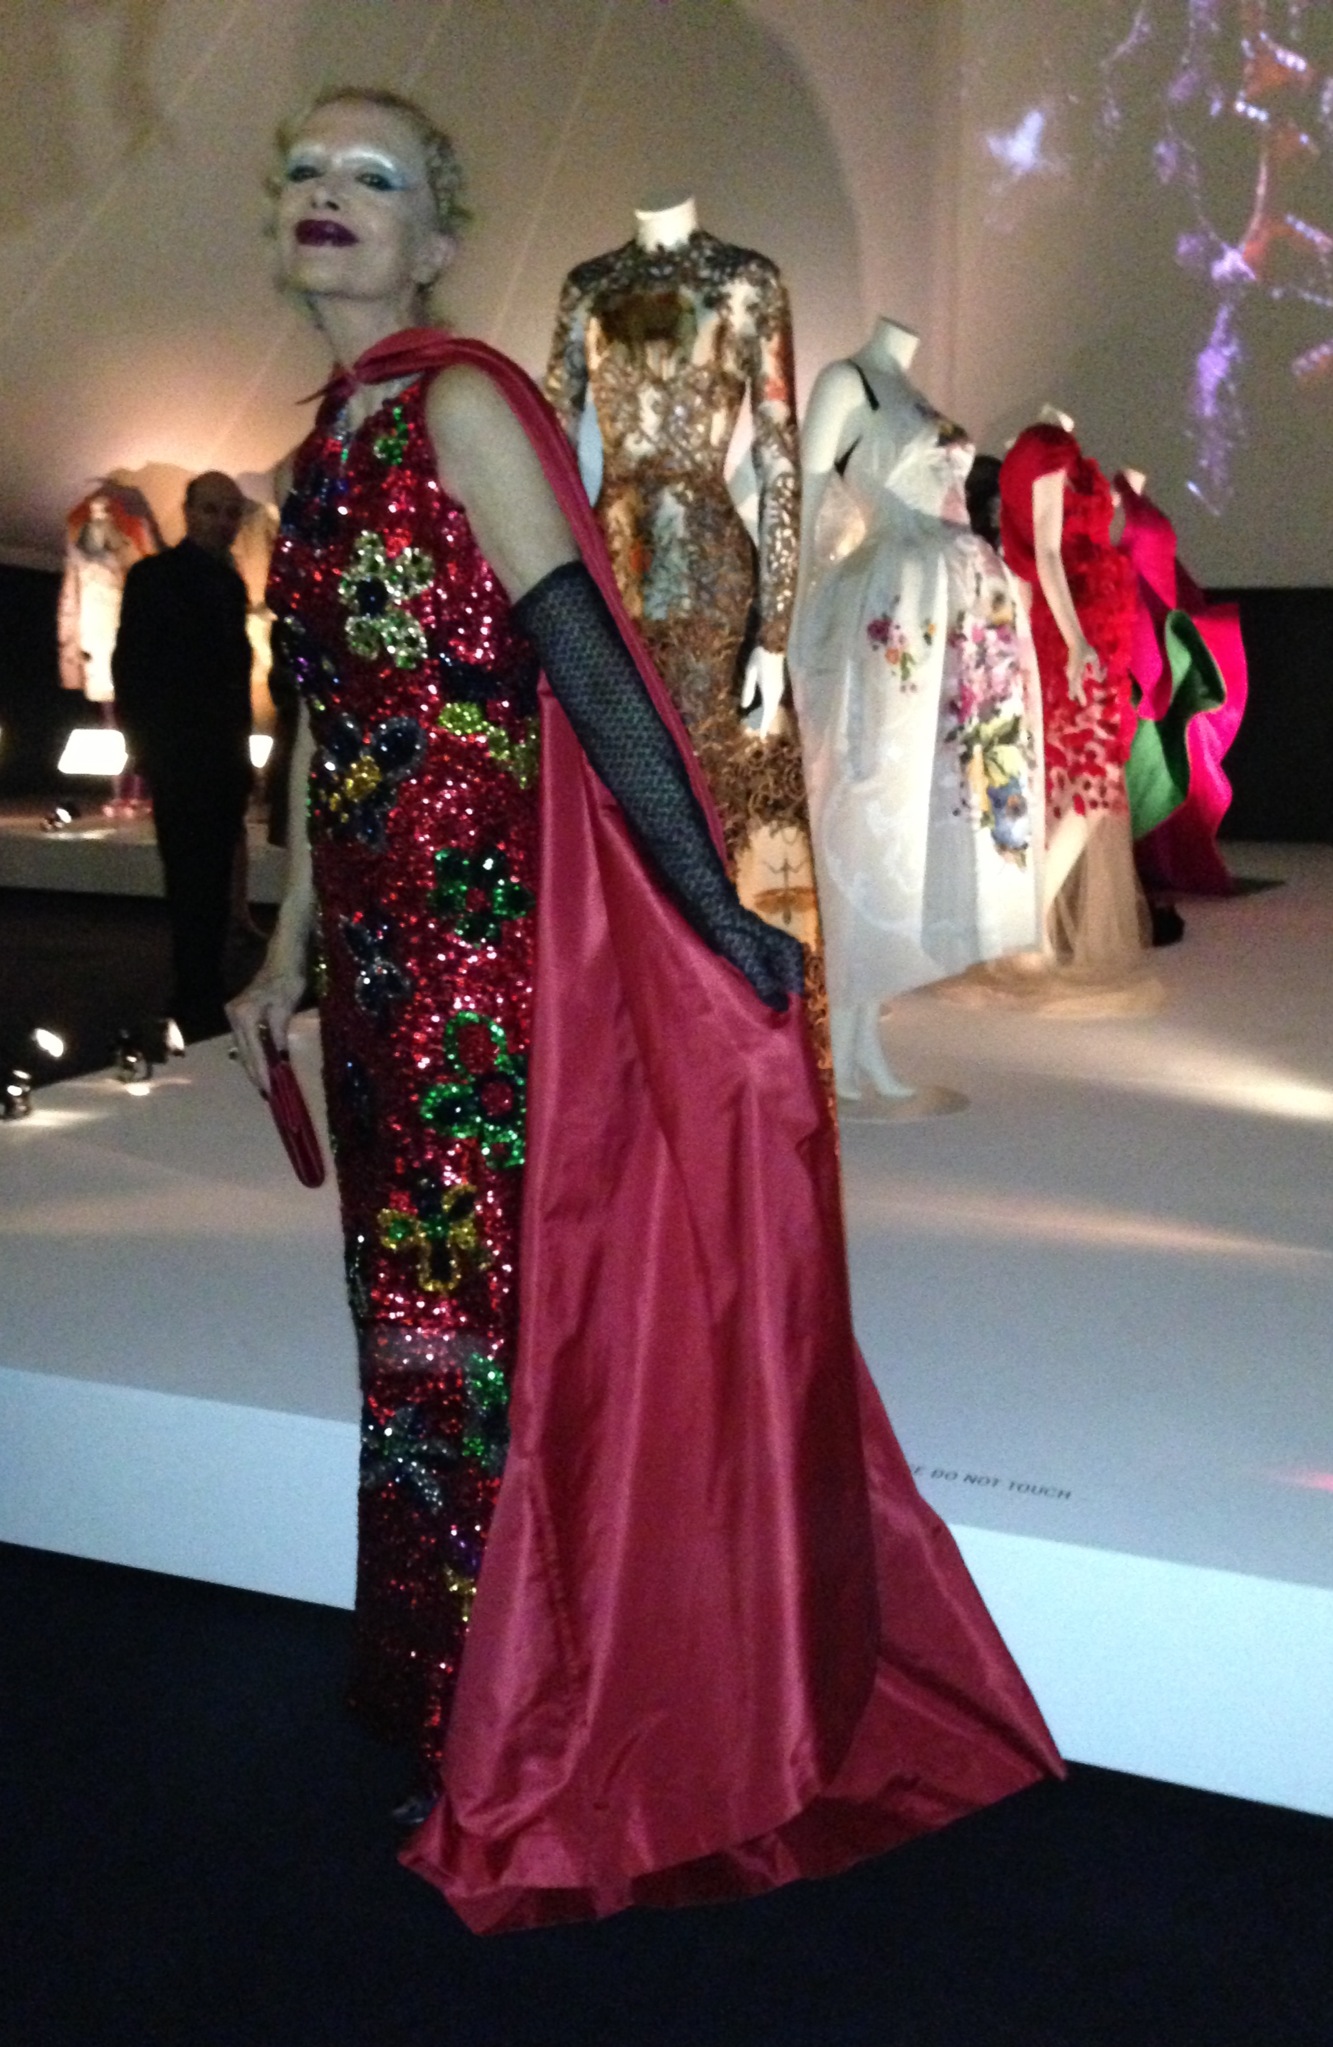 Cecilia Matteucci Lavarini wears an evening gown designed by Biki to the party which opened the V&A exhibition.